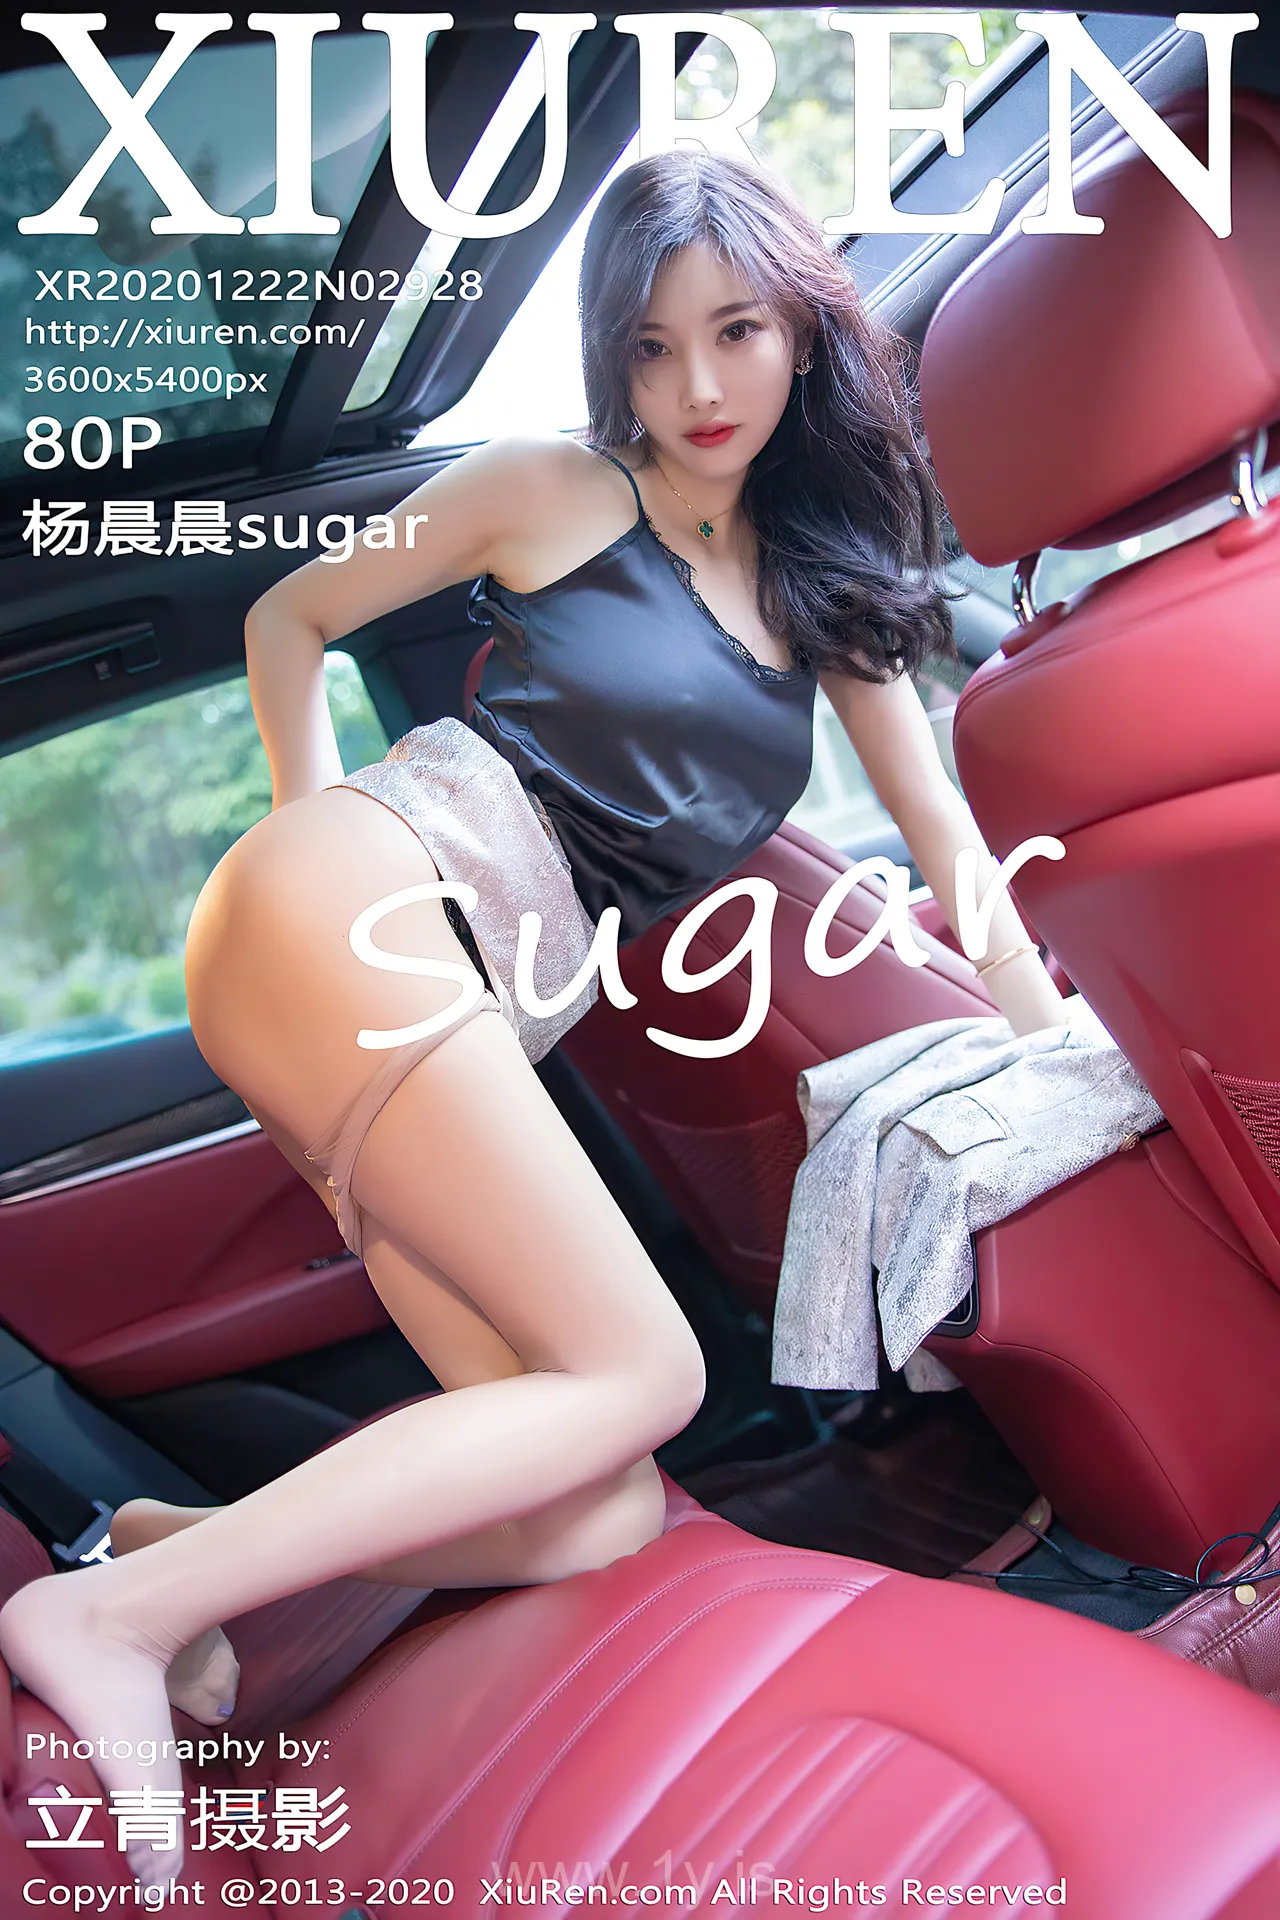 XIUREN(秀人网) NO.2928 Refined & Lively Chinese Girl 杨晨晨sugar